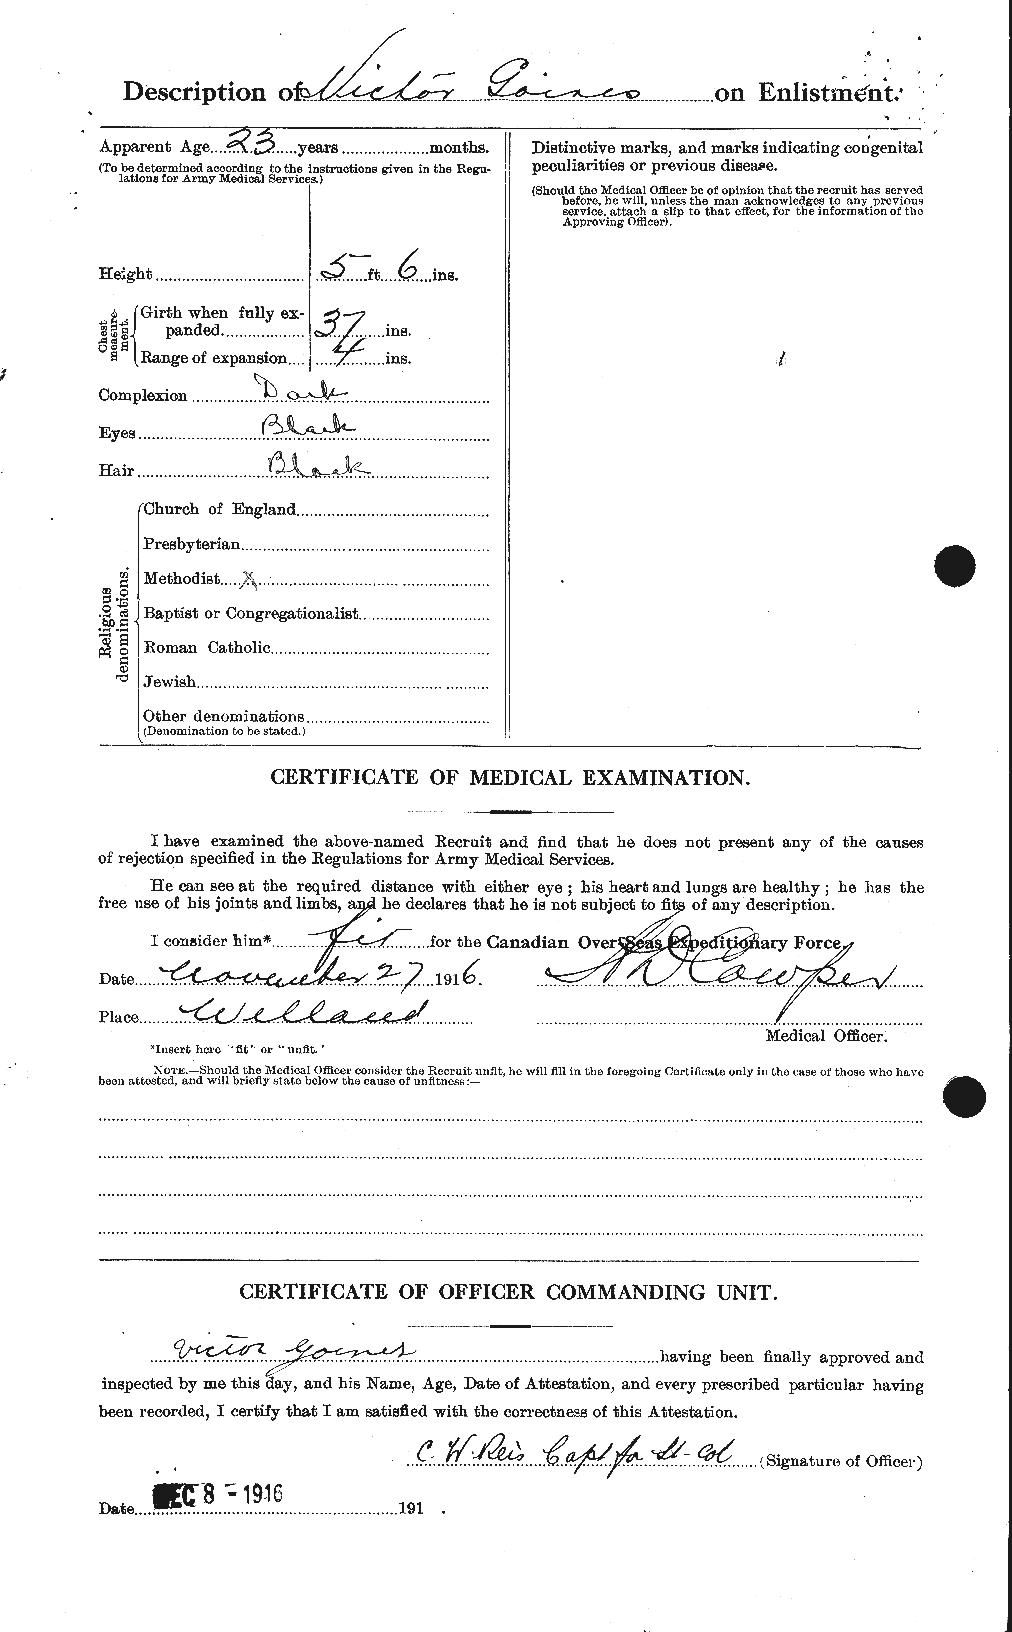 Personnel Records of the First World War - CEF 352155b